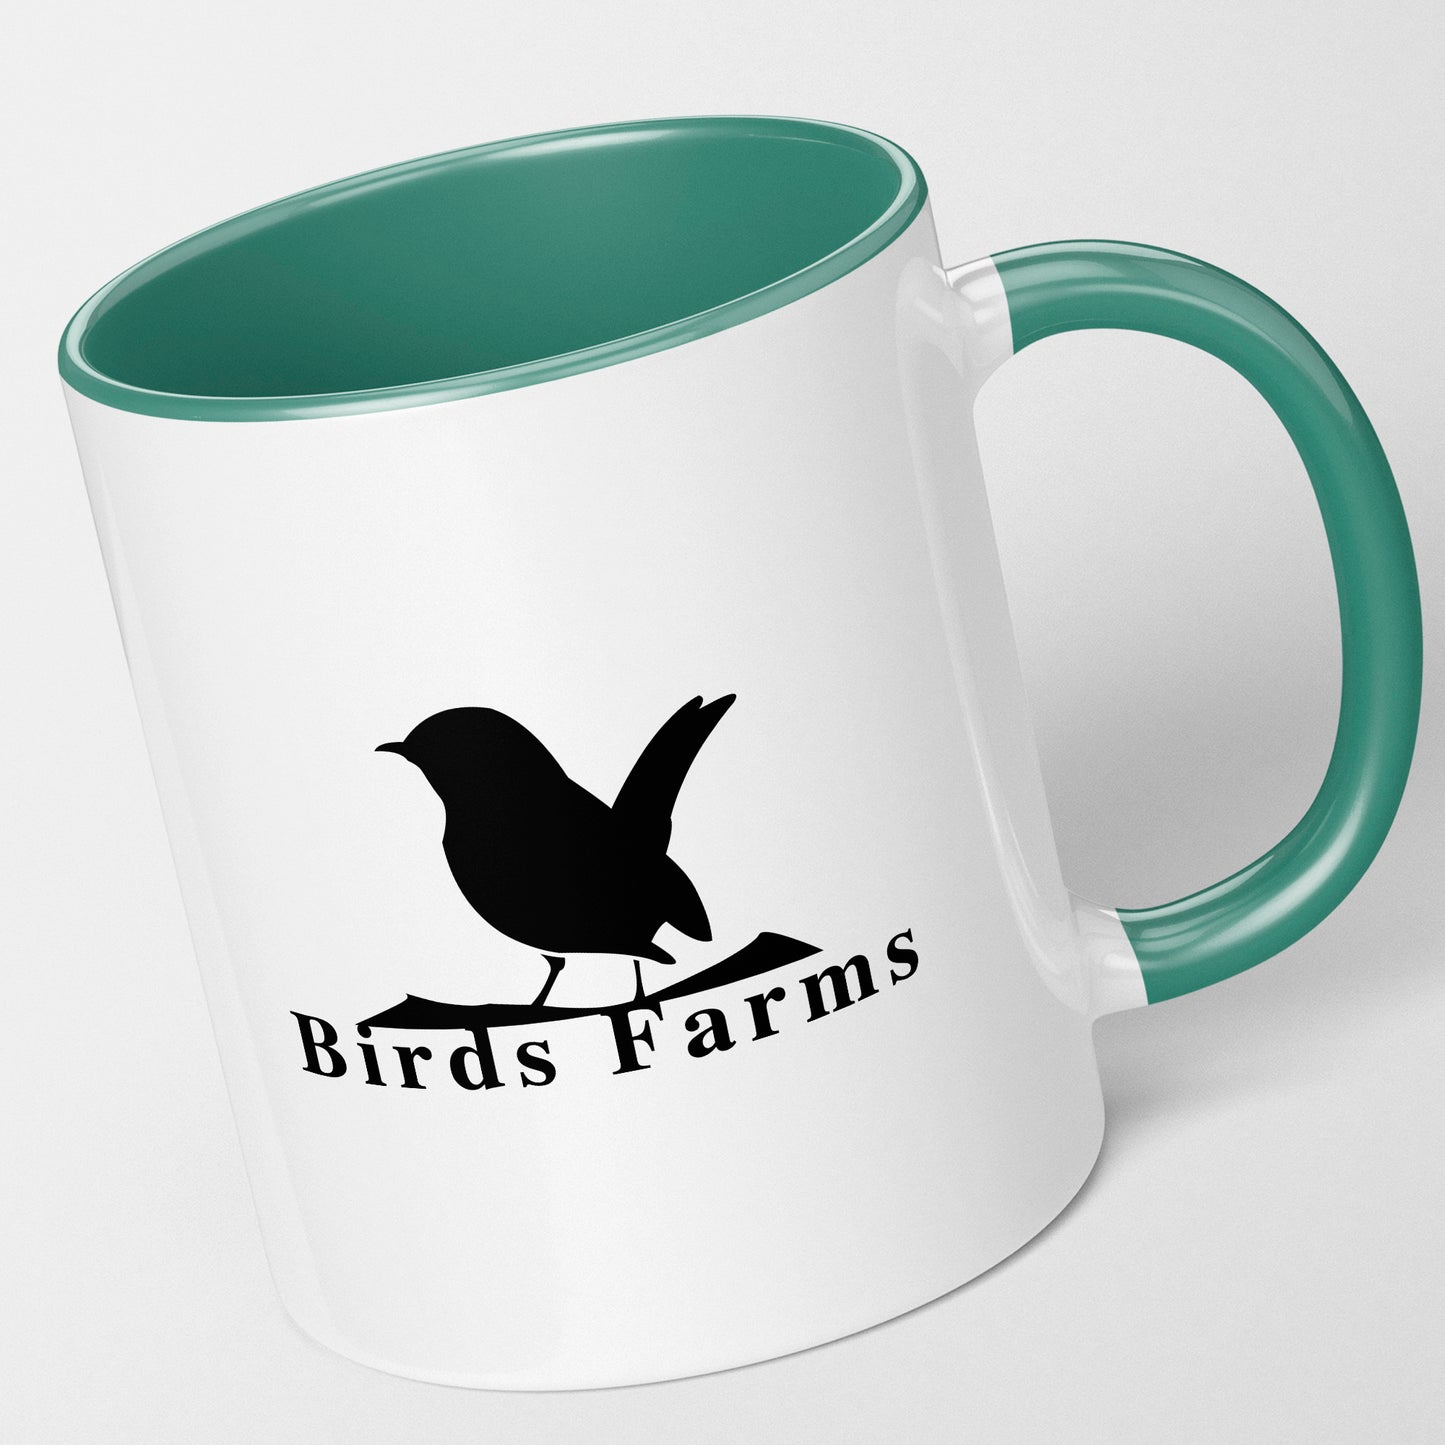 Branded Mugs (Teal) - Fully Inclusive Pricing Full Colour Both Sides &  Free Delivery